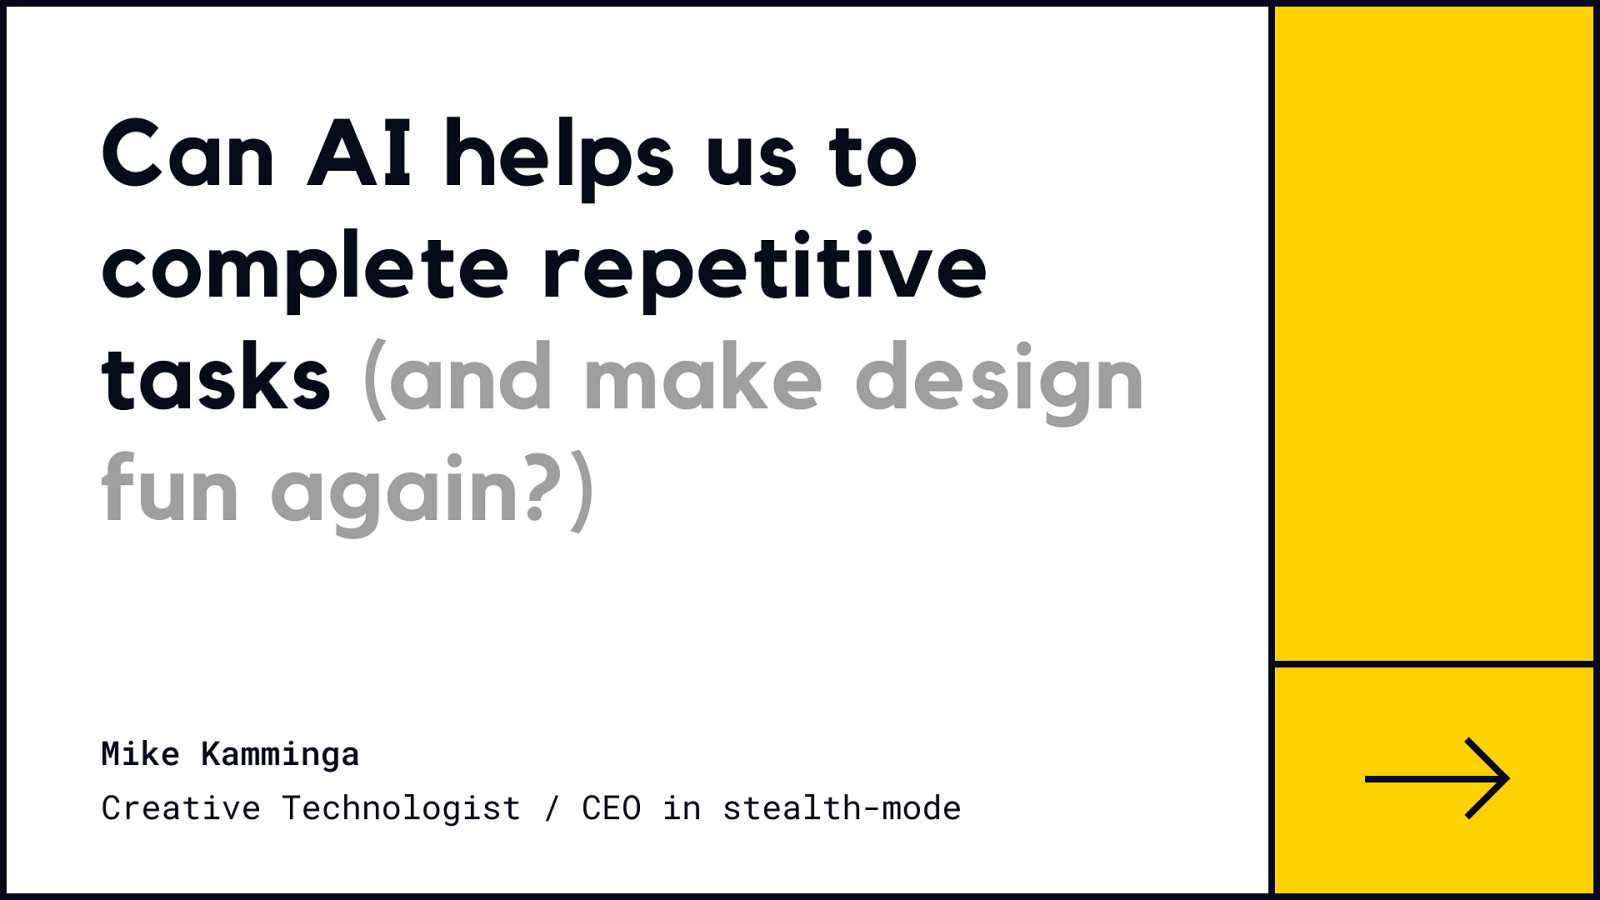 Can AI help us to complete repetitive tasks (and make design fun again?)